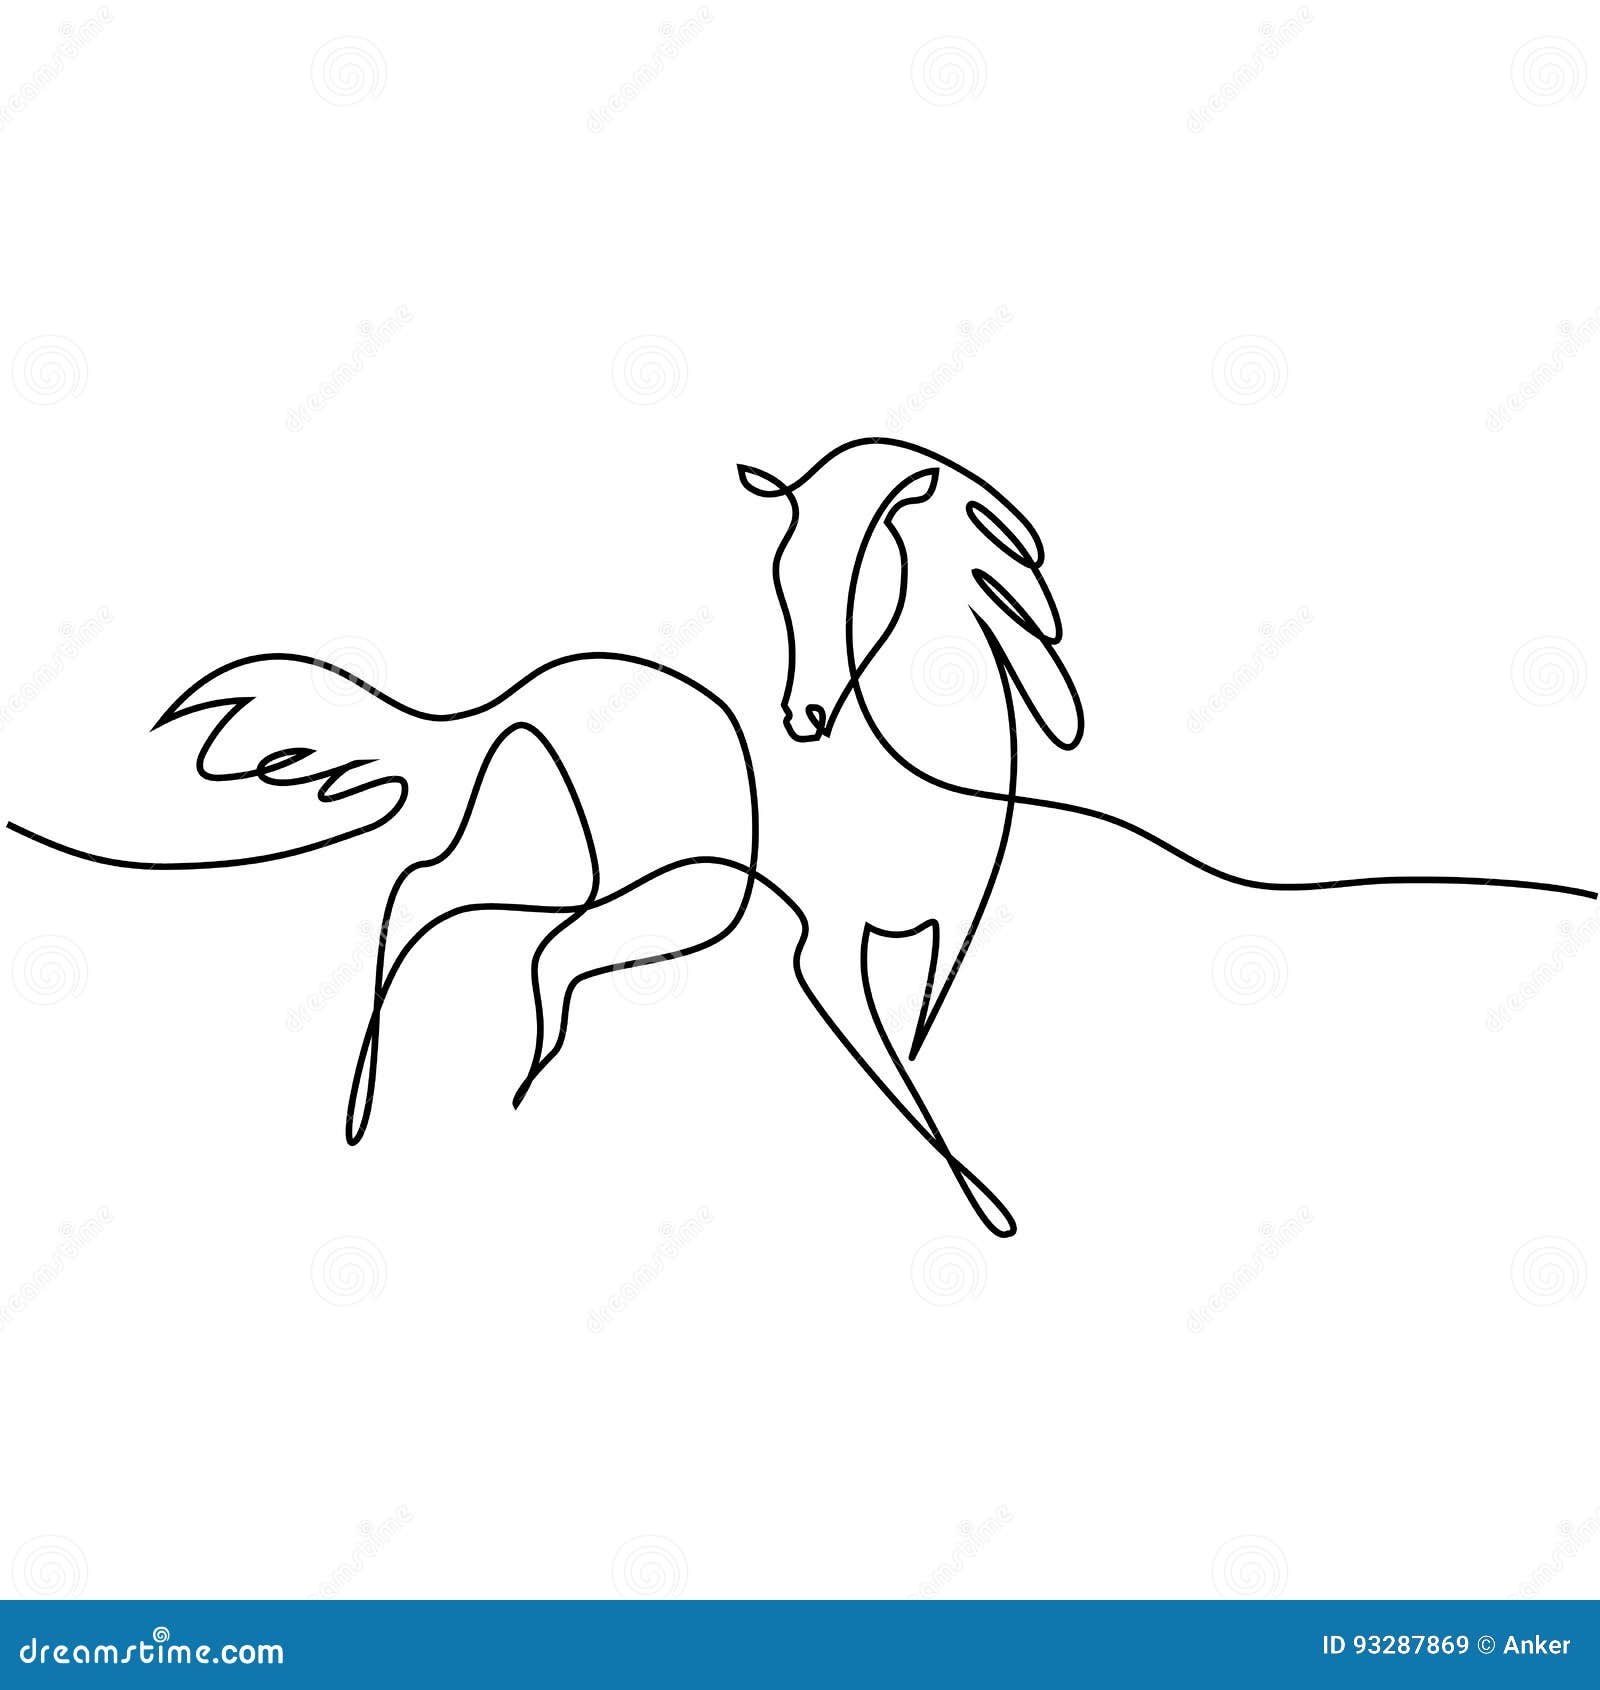 con ele в Instagram  Adopted Single line horse for adoption If you  love horses your surname is horse  Horse tattoo design Horse tattoo  Line art drawings